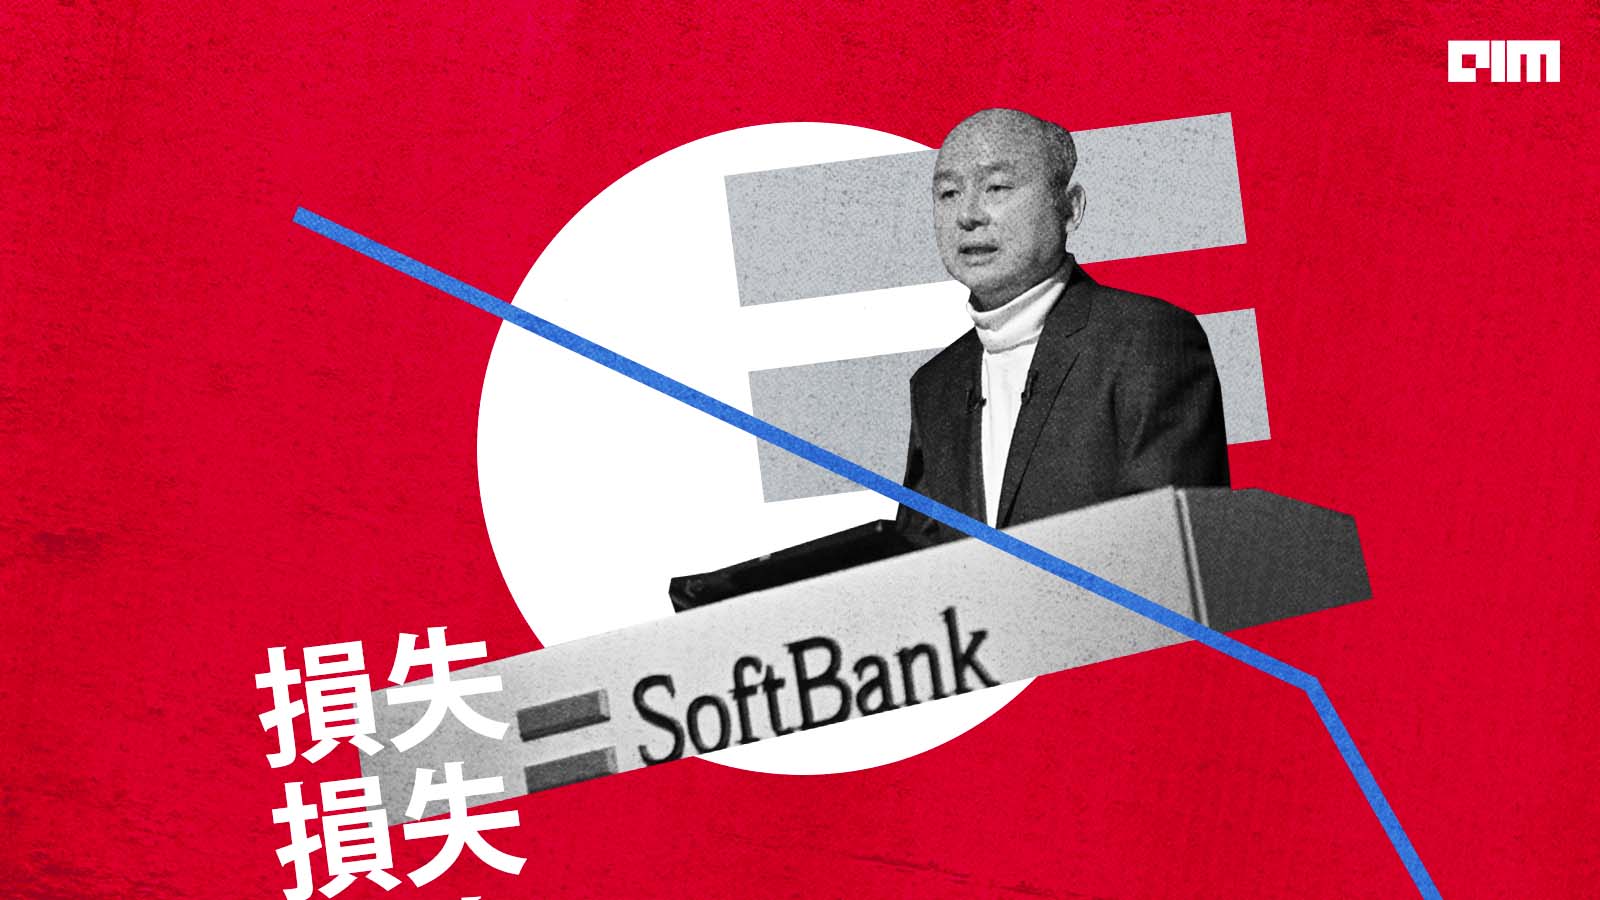 SoftBank’s finite disappointment and infinite hope